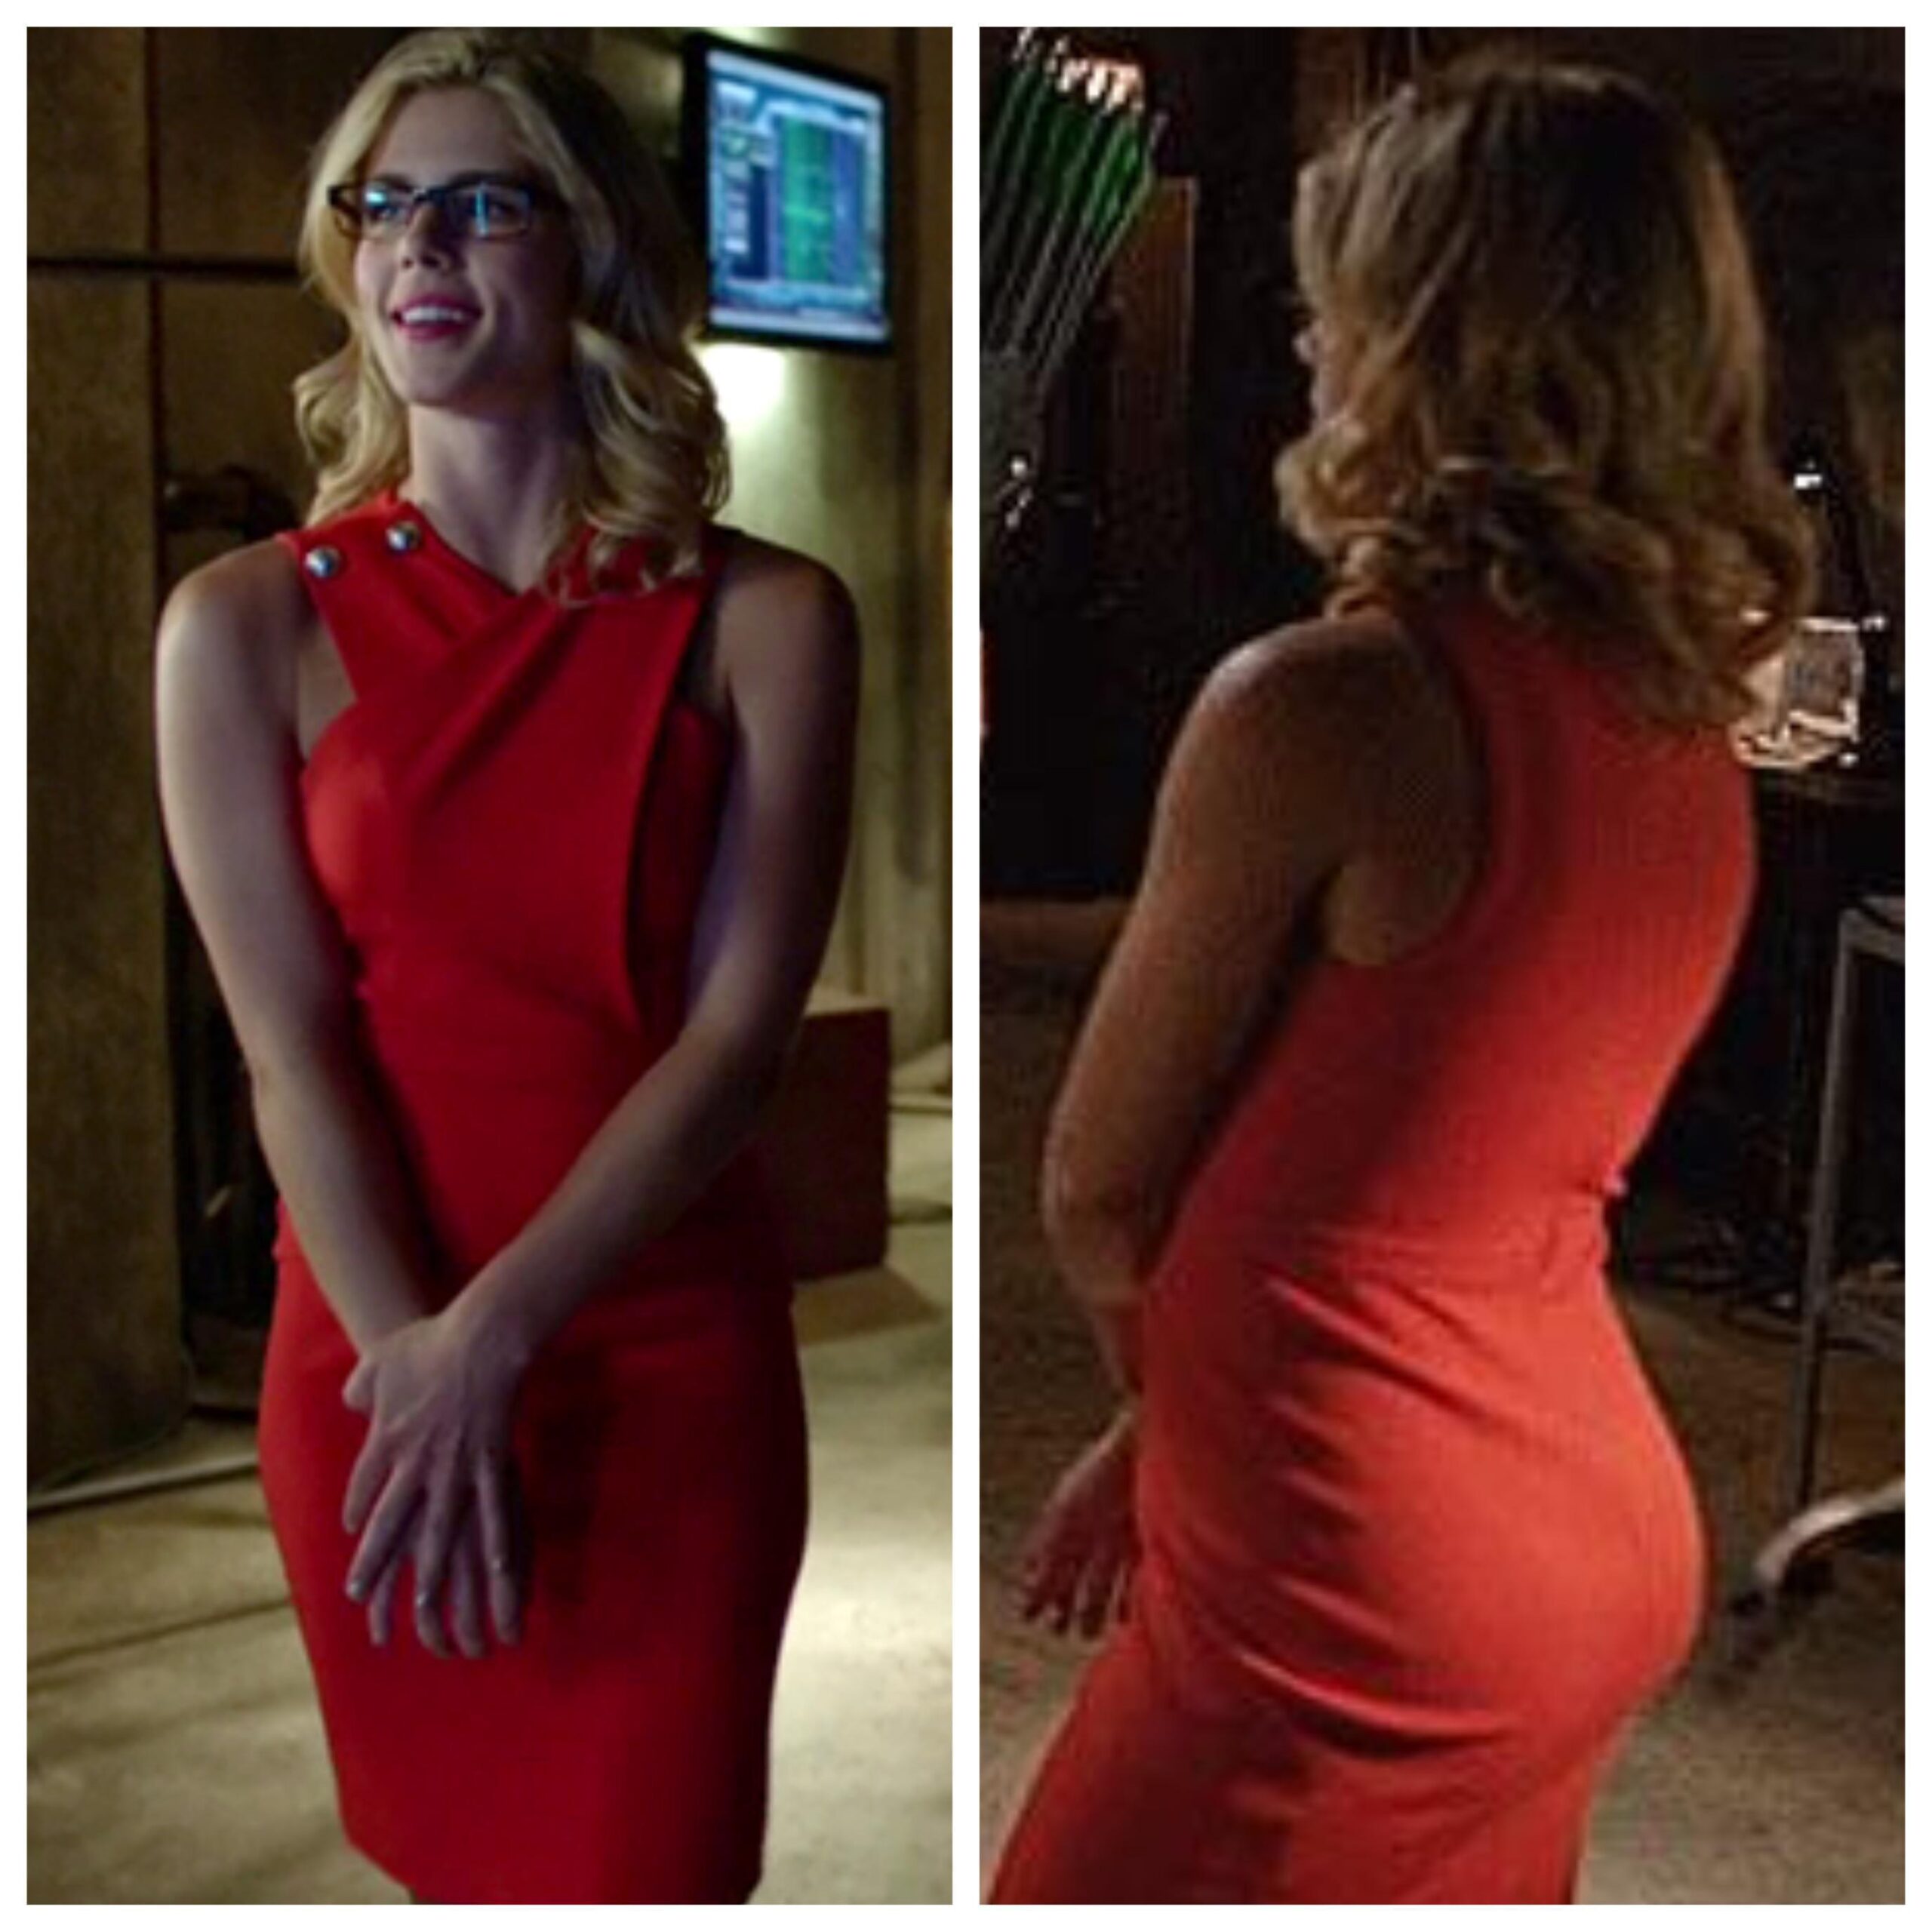 Emily Bett Rickards tactic to increase Arrows ratings over the